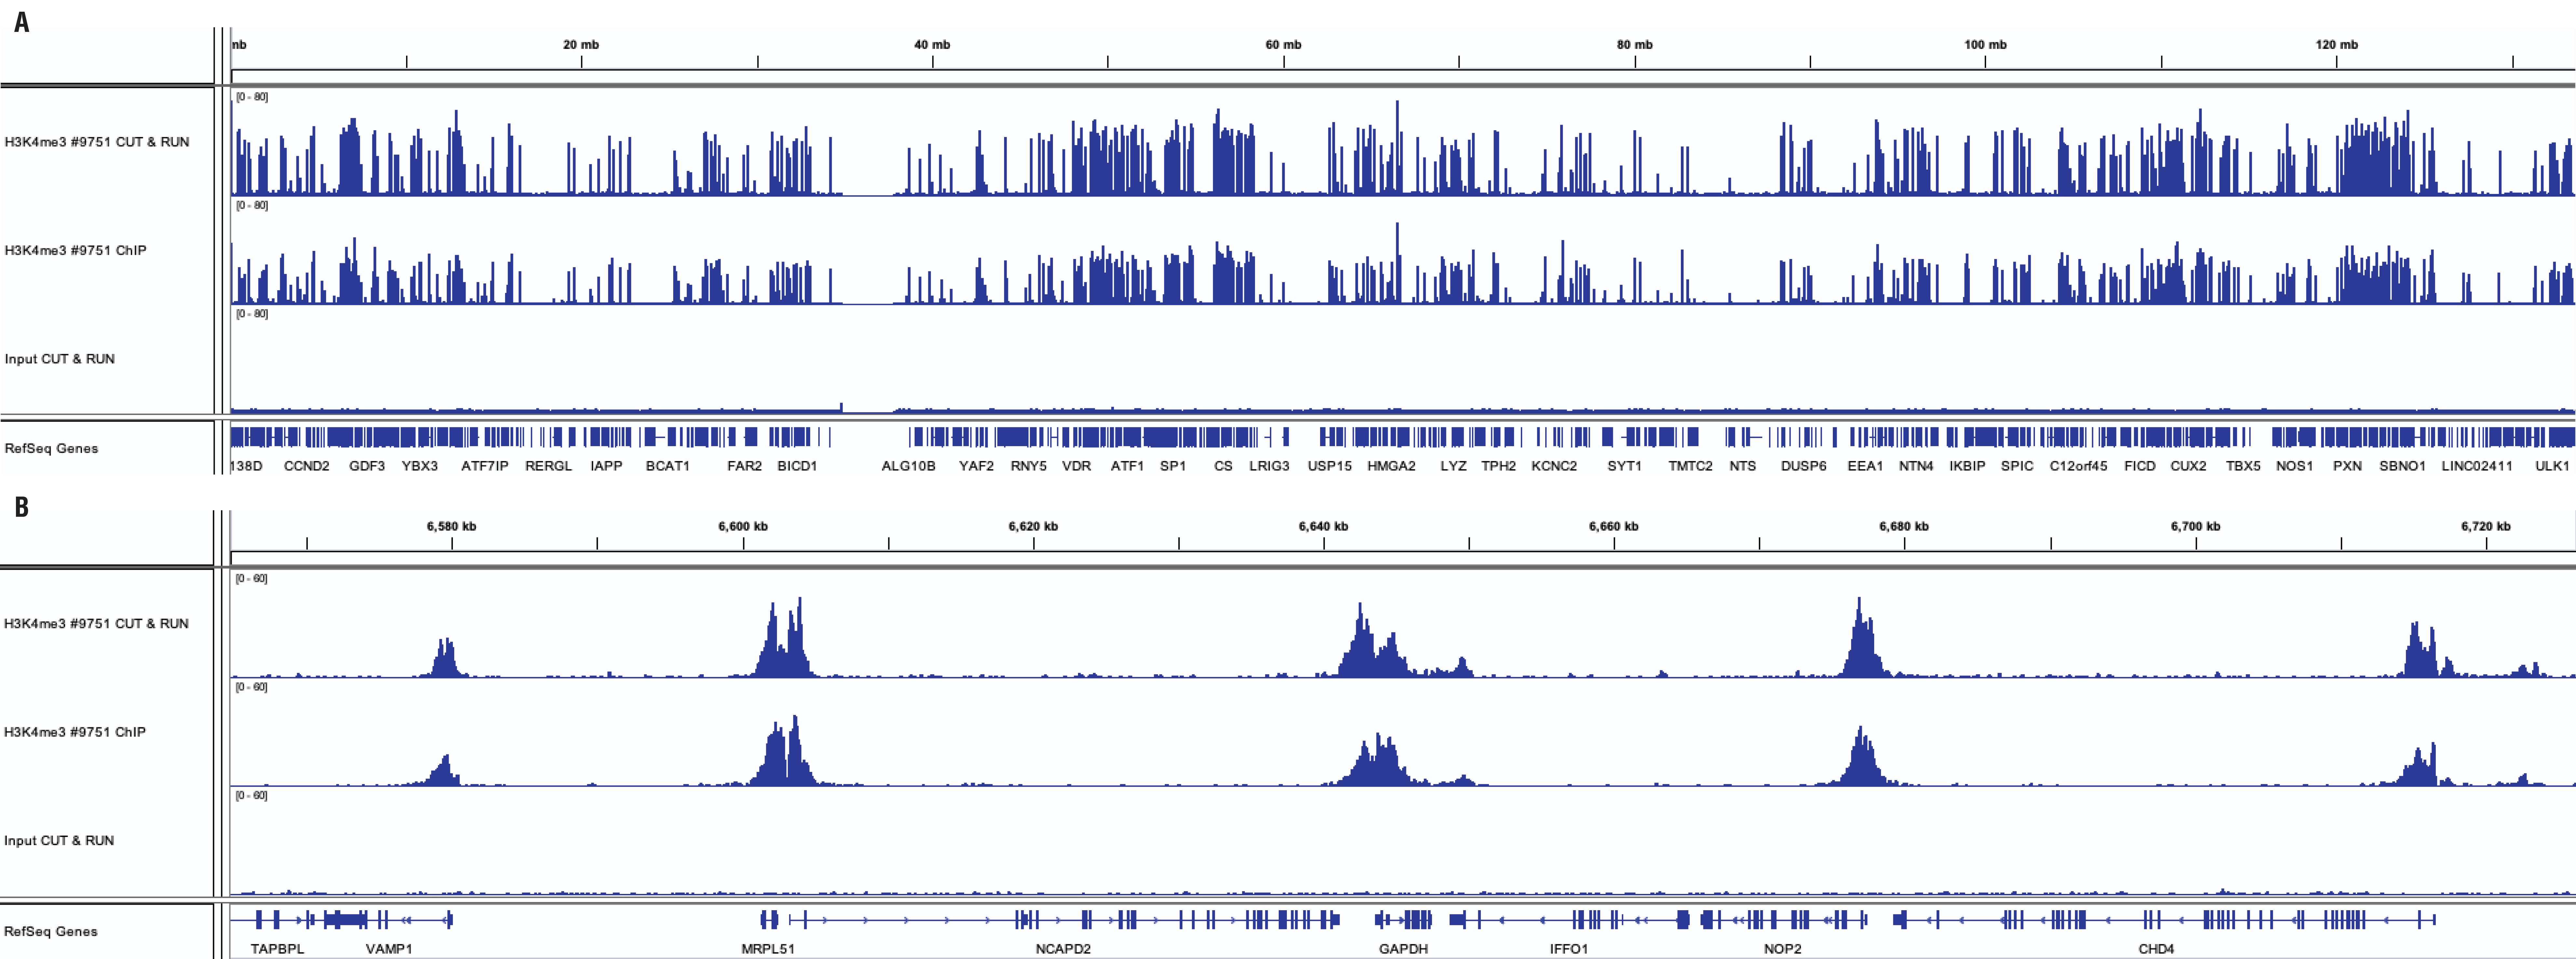 H3K4me3 sequencing results for CUT&RUN and ChIP